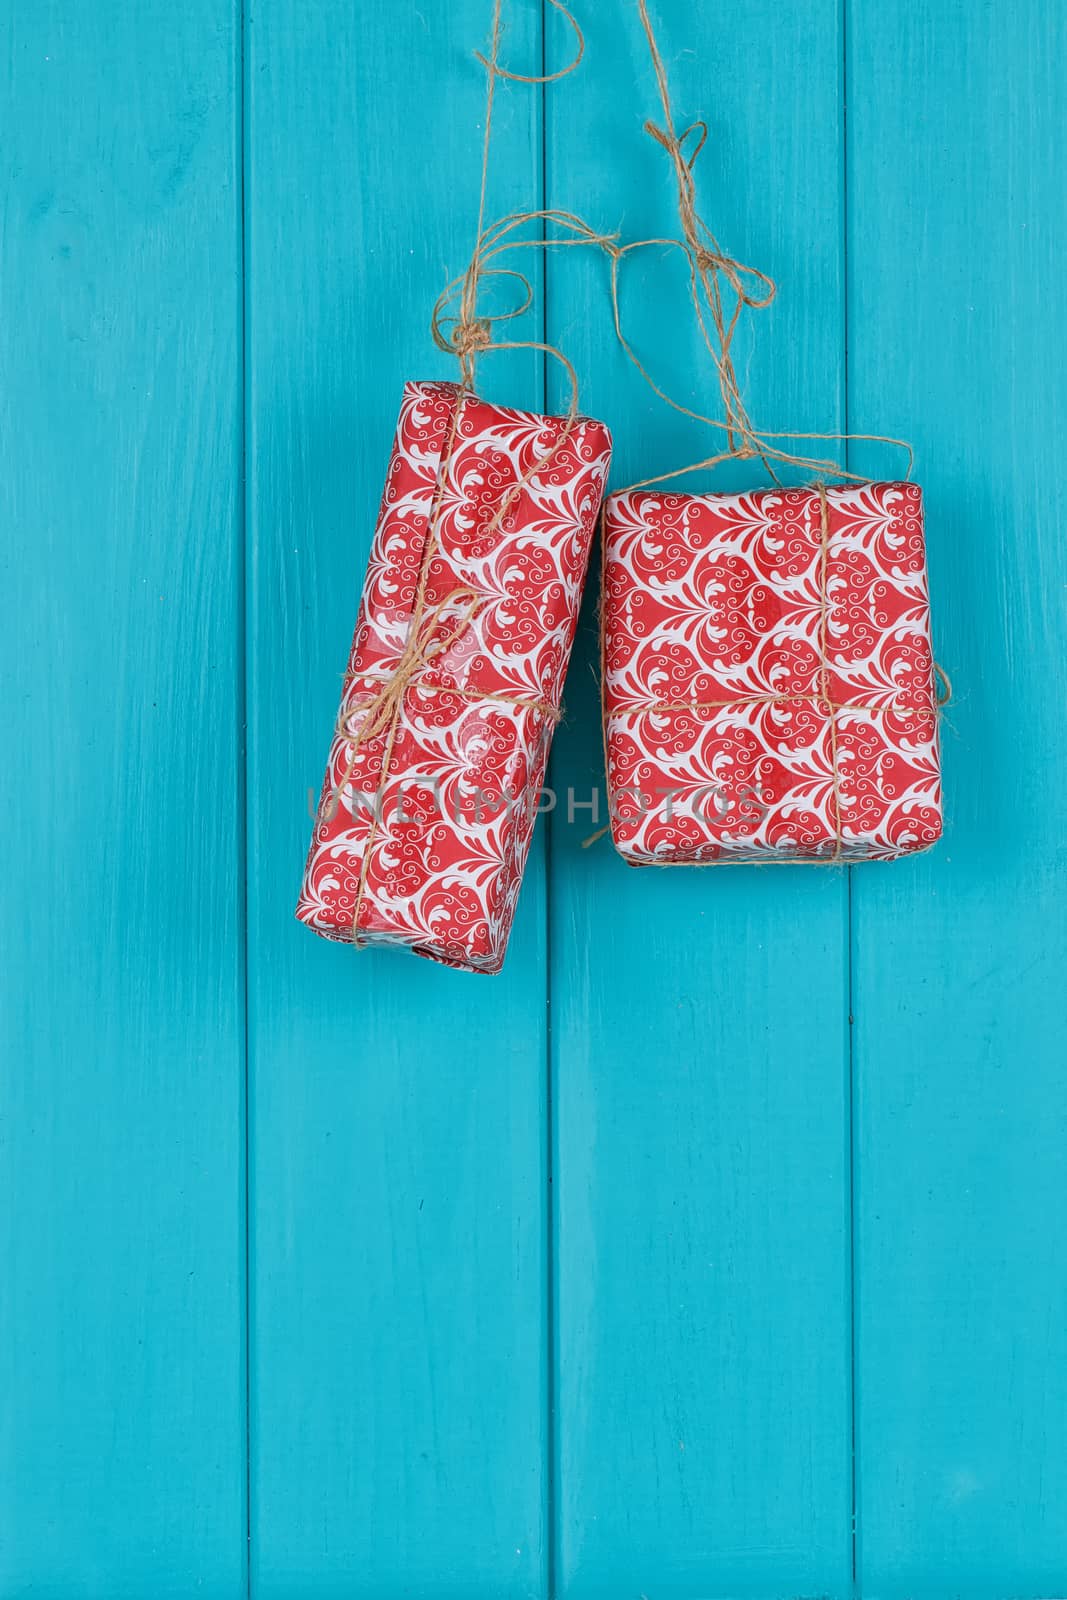 Christmas decorations hanging on rope in front of blue wooden background. by victosha